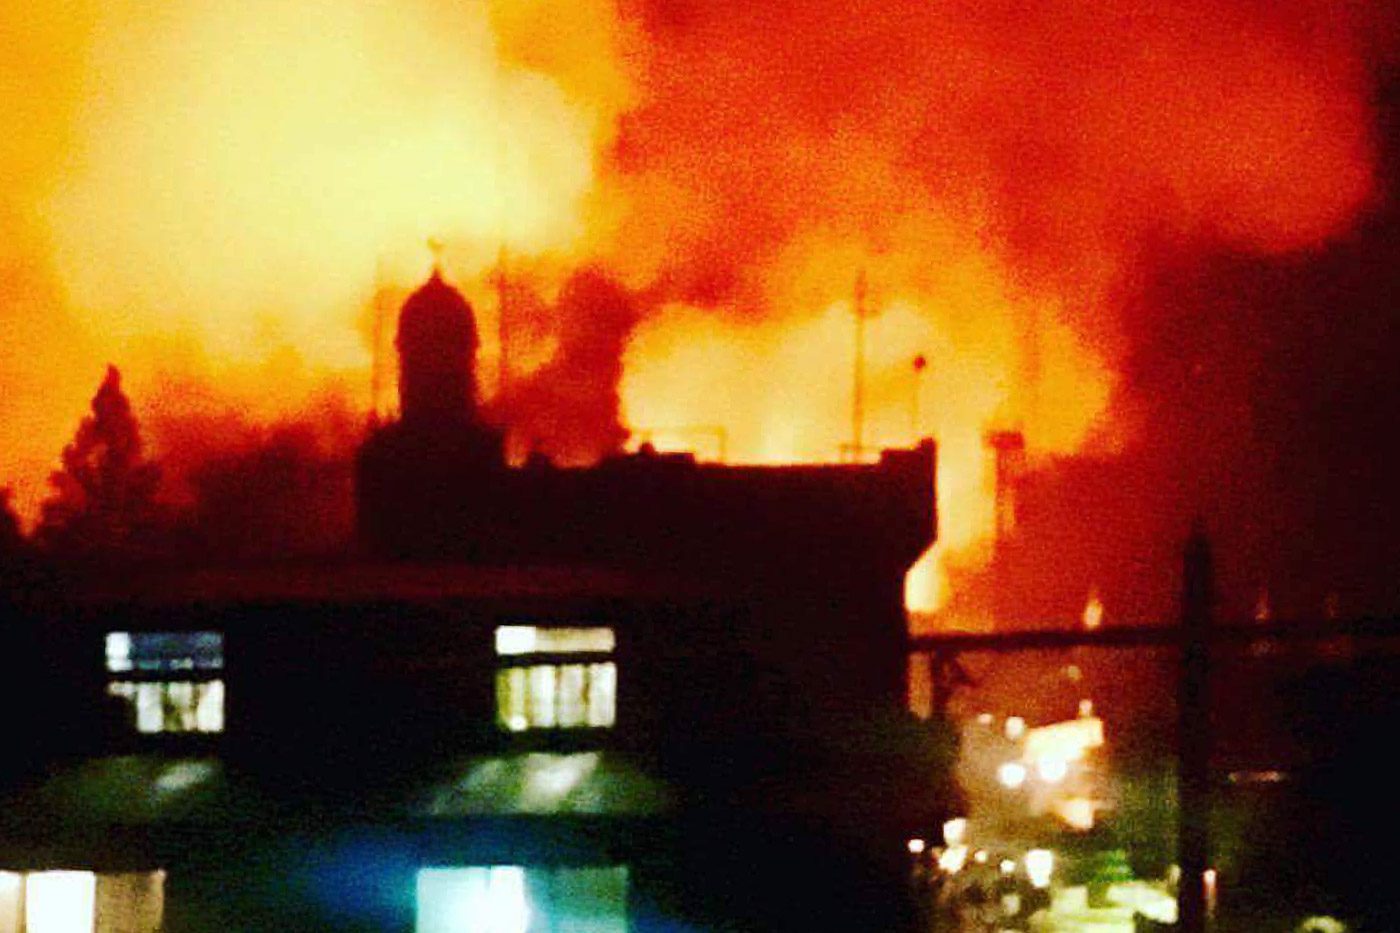 MARAWI BURNING. 3 separate fires broke out enveloping the City Jail, Dansalan College, and Saint Mary's Church on Tuesday night. Photo from @du_kartoffel 